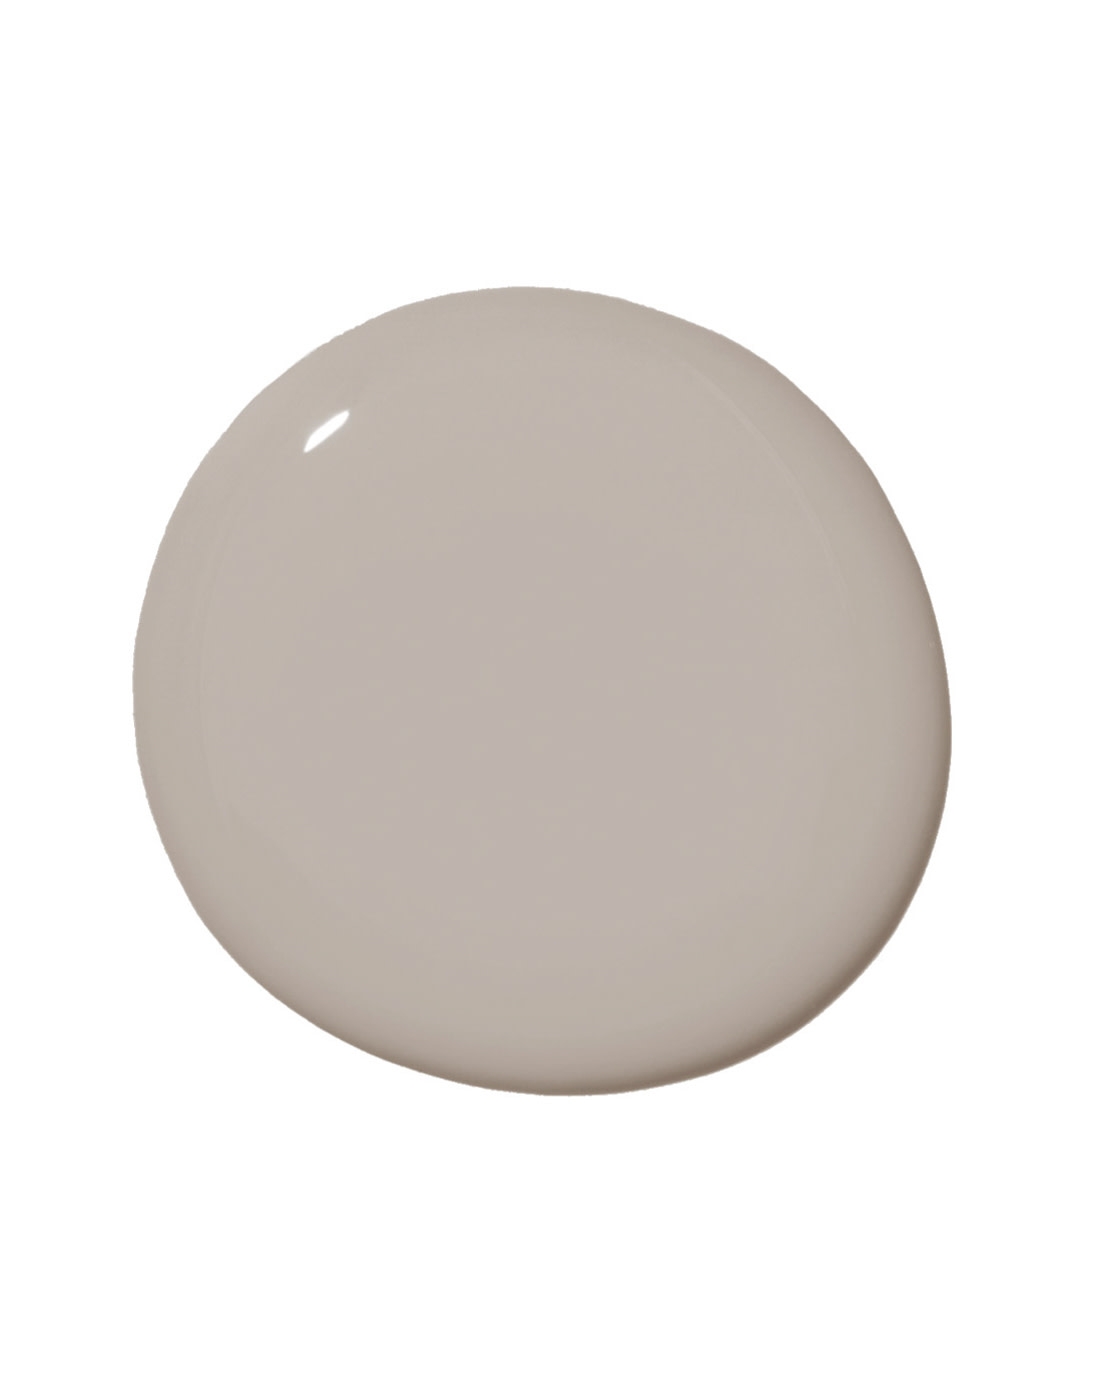 Clare Paint - Greige - Eggshell Gallon - Image 0